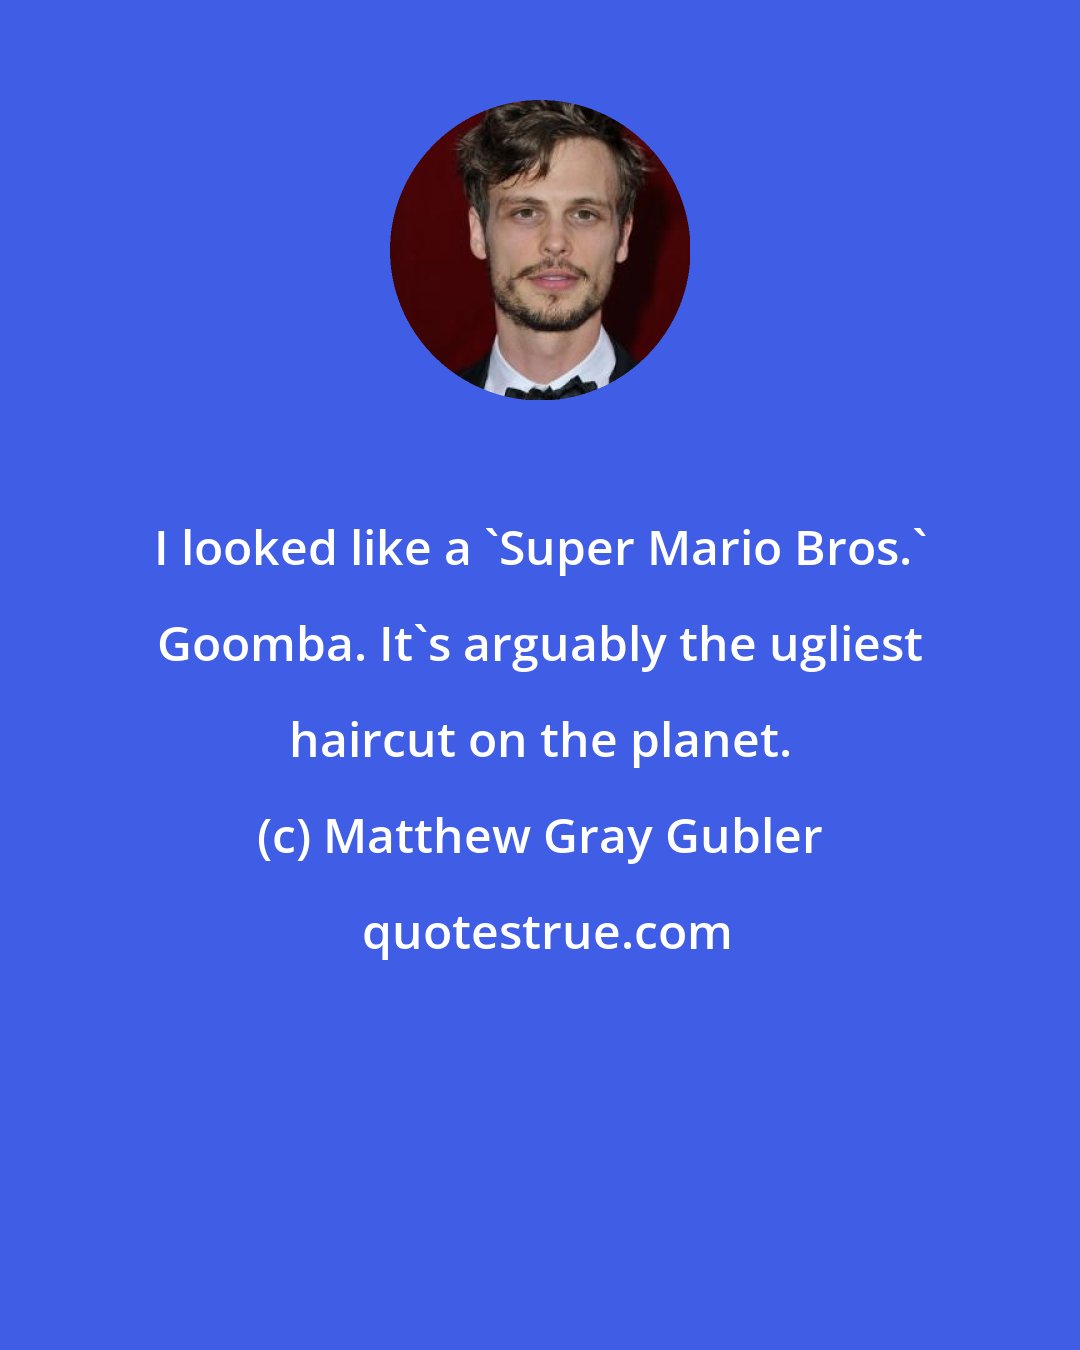 Matthew Gray Gubler: I looked like a 'Super Mario Bros.' Goomba. It's arguably the ugliest haircut on the planet.